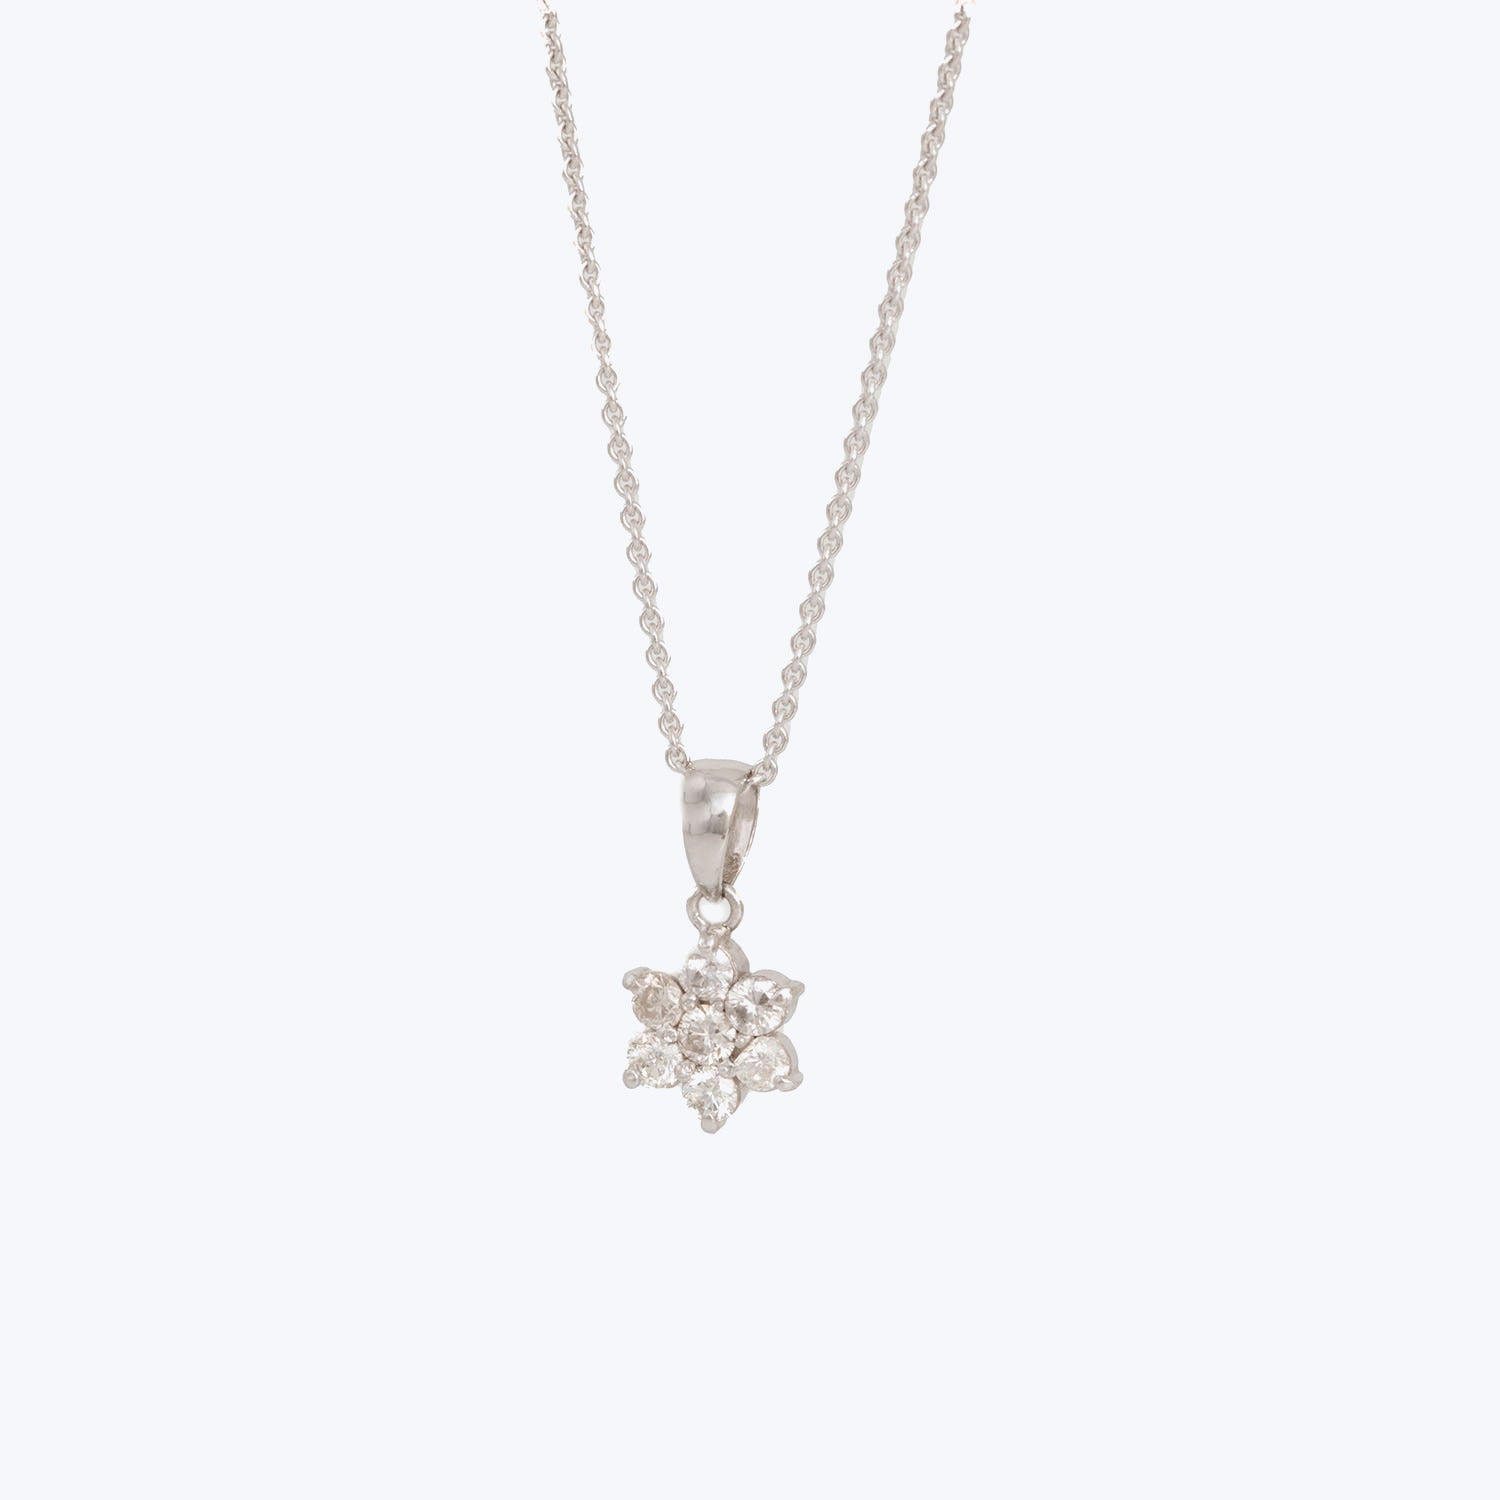 Elegant silver necklace with flower pendant adorned with sparkling stones.